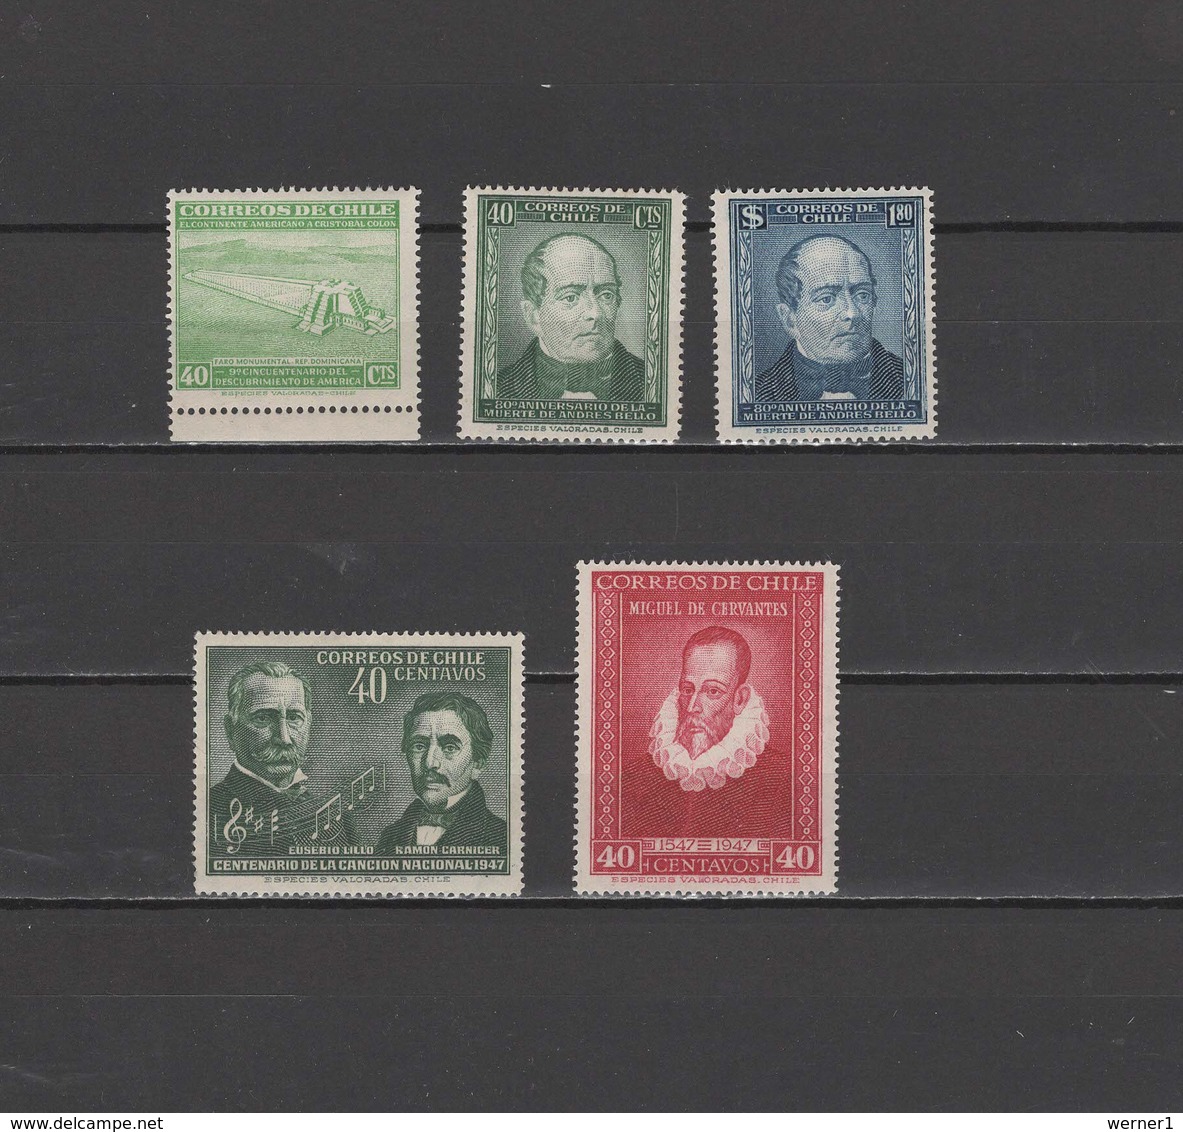 Chile 1945/1947 Michel 352-354, 357-358 Discovery Of America 450th, Andres Bello, National Anthem Etc. 5 Stamps MNH - Chile